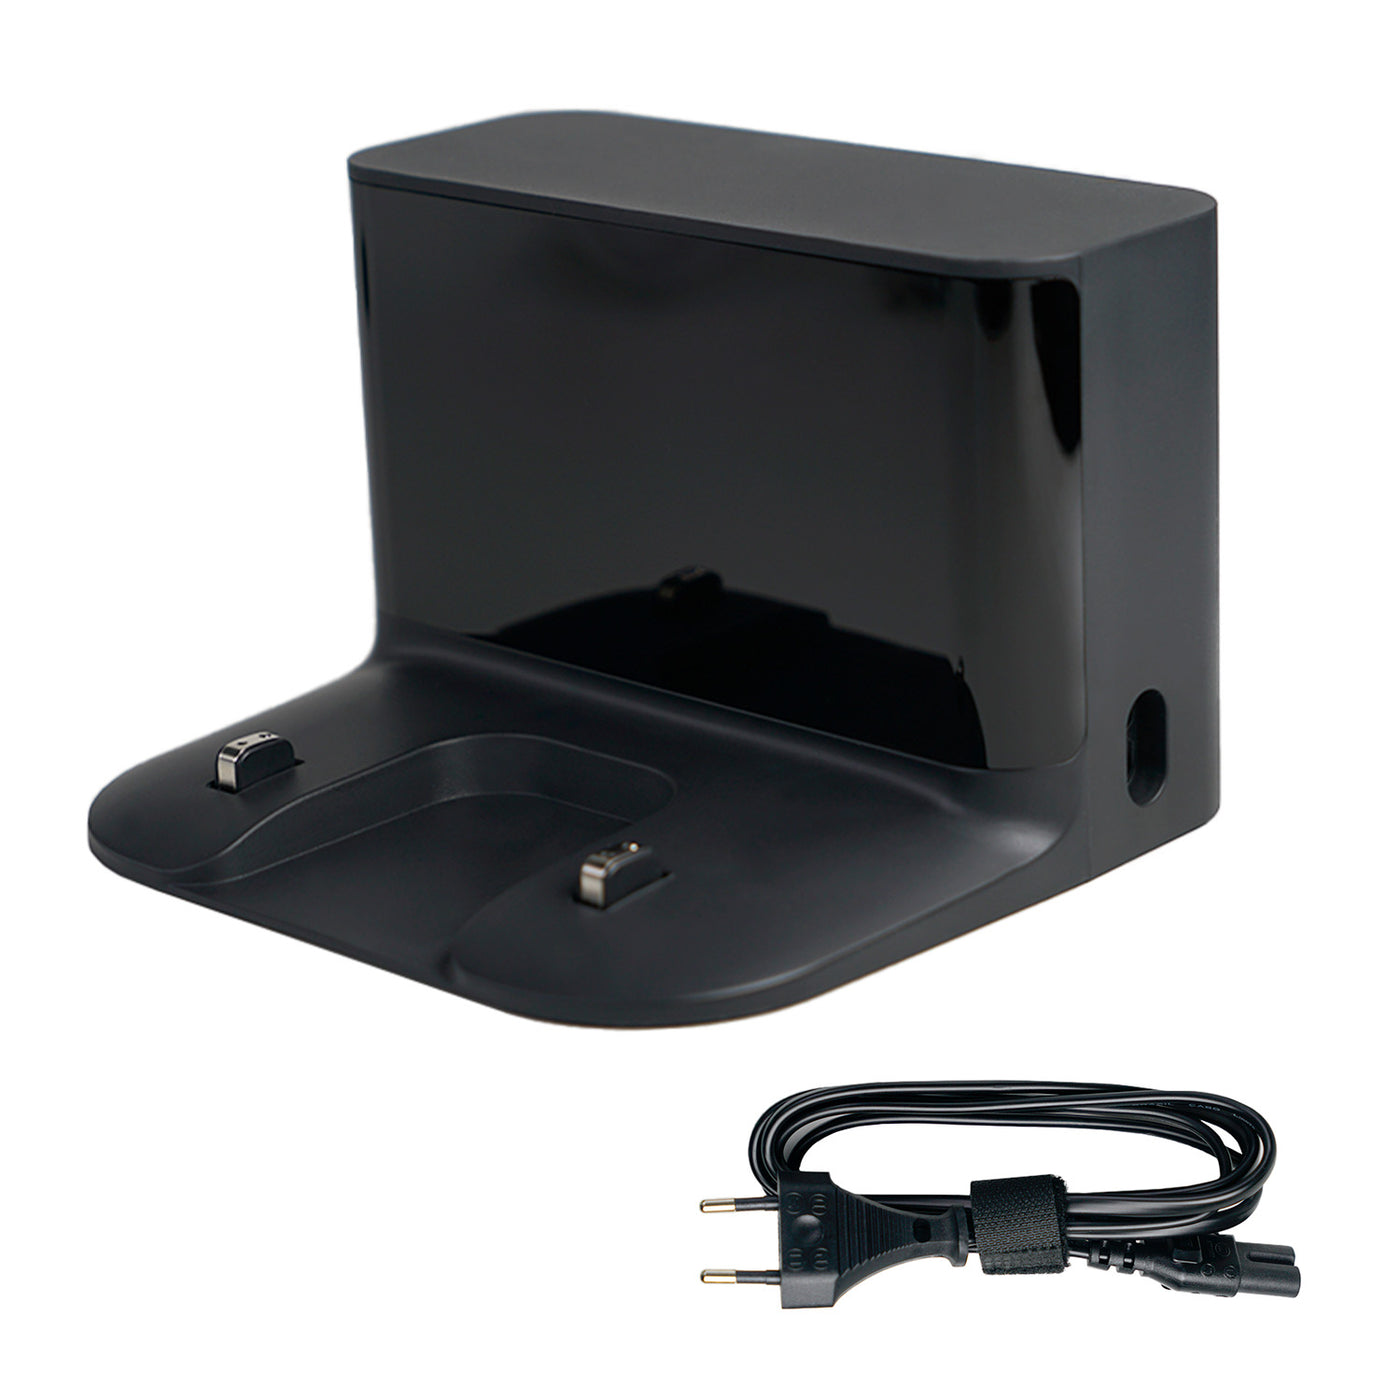 Replacement ZACO charging station incl. power cord for A11s Pro